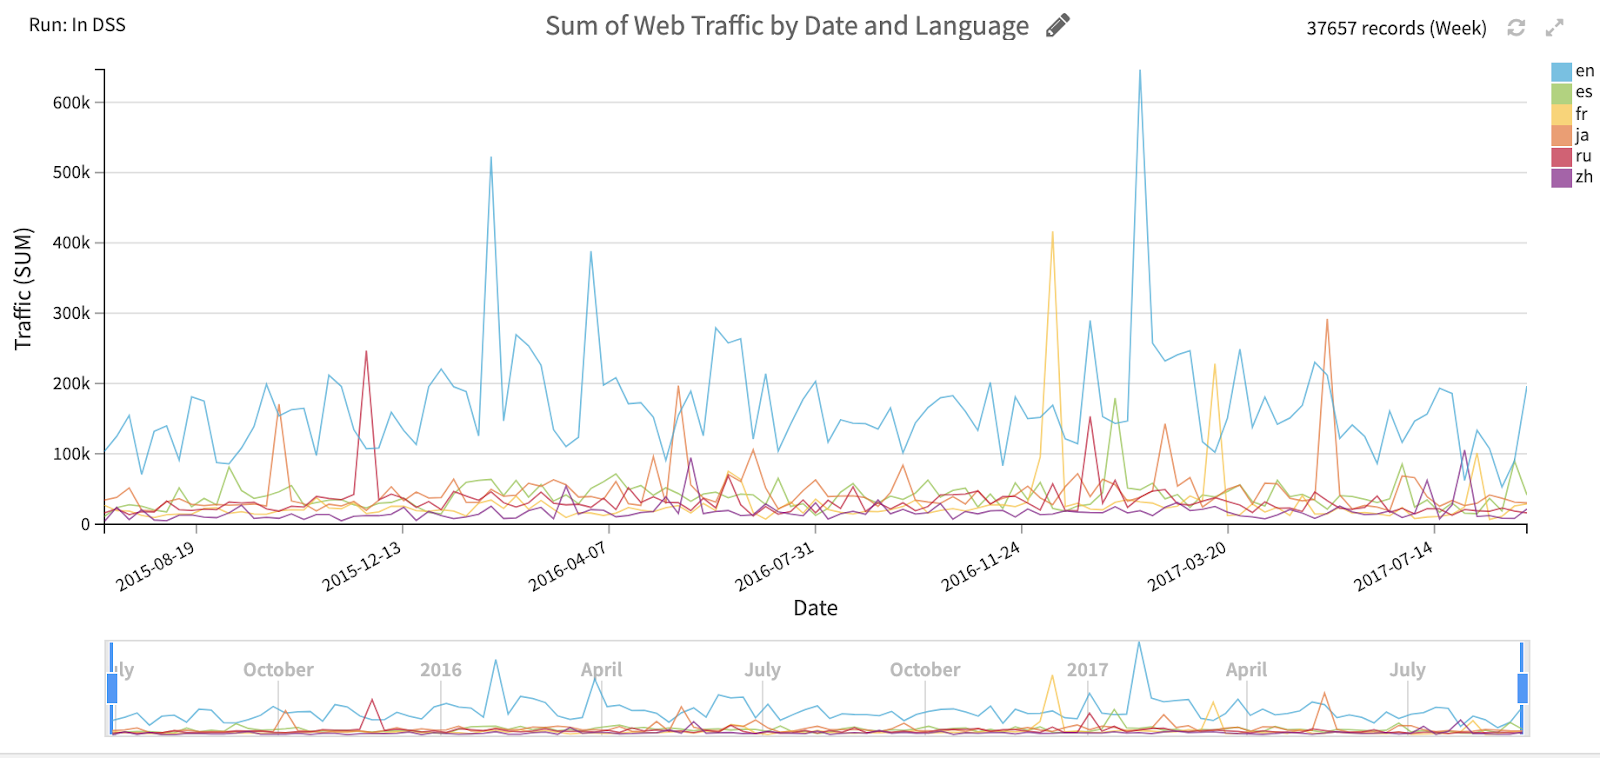 sum of web traffic by language over time